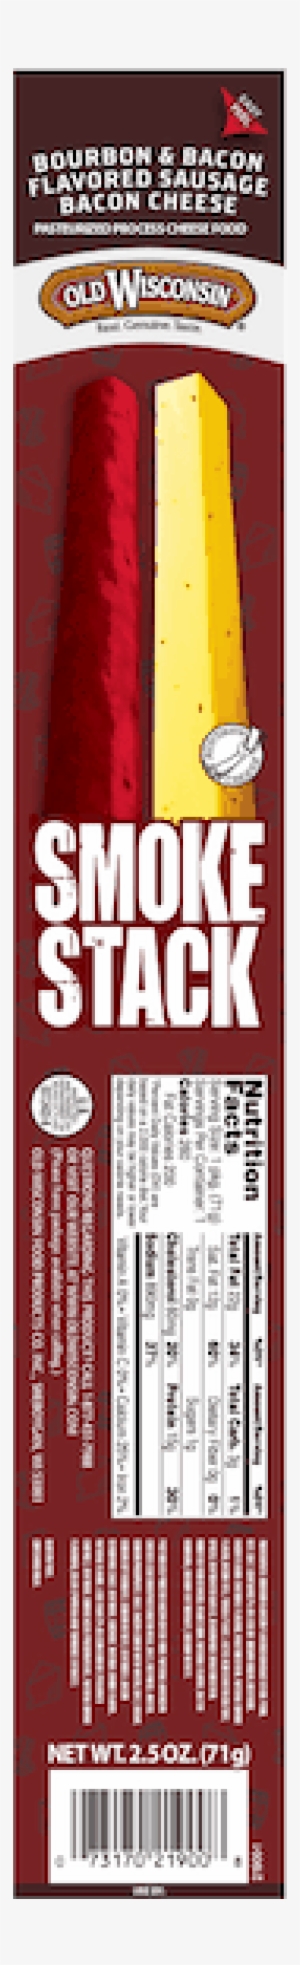 50 For Old Wisconsin® Smoke Stack Snack Sticks